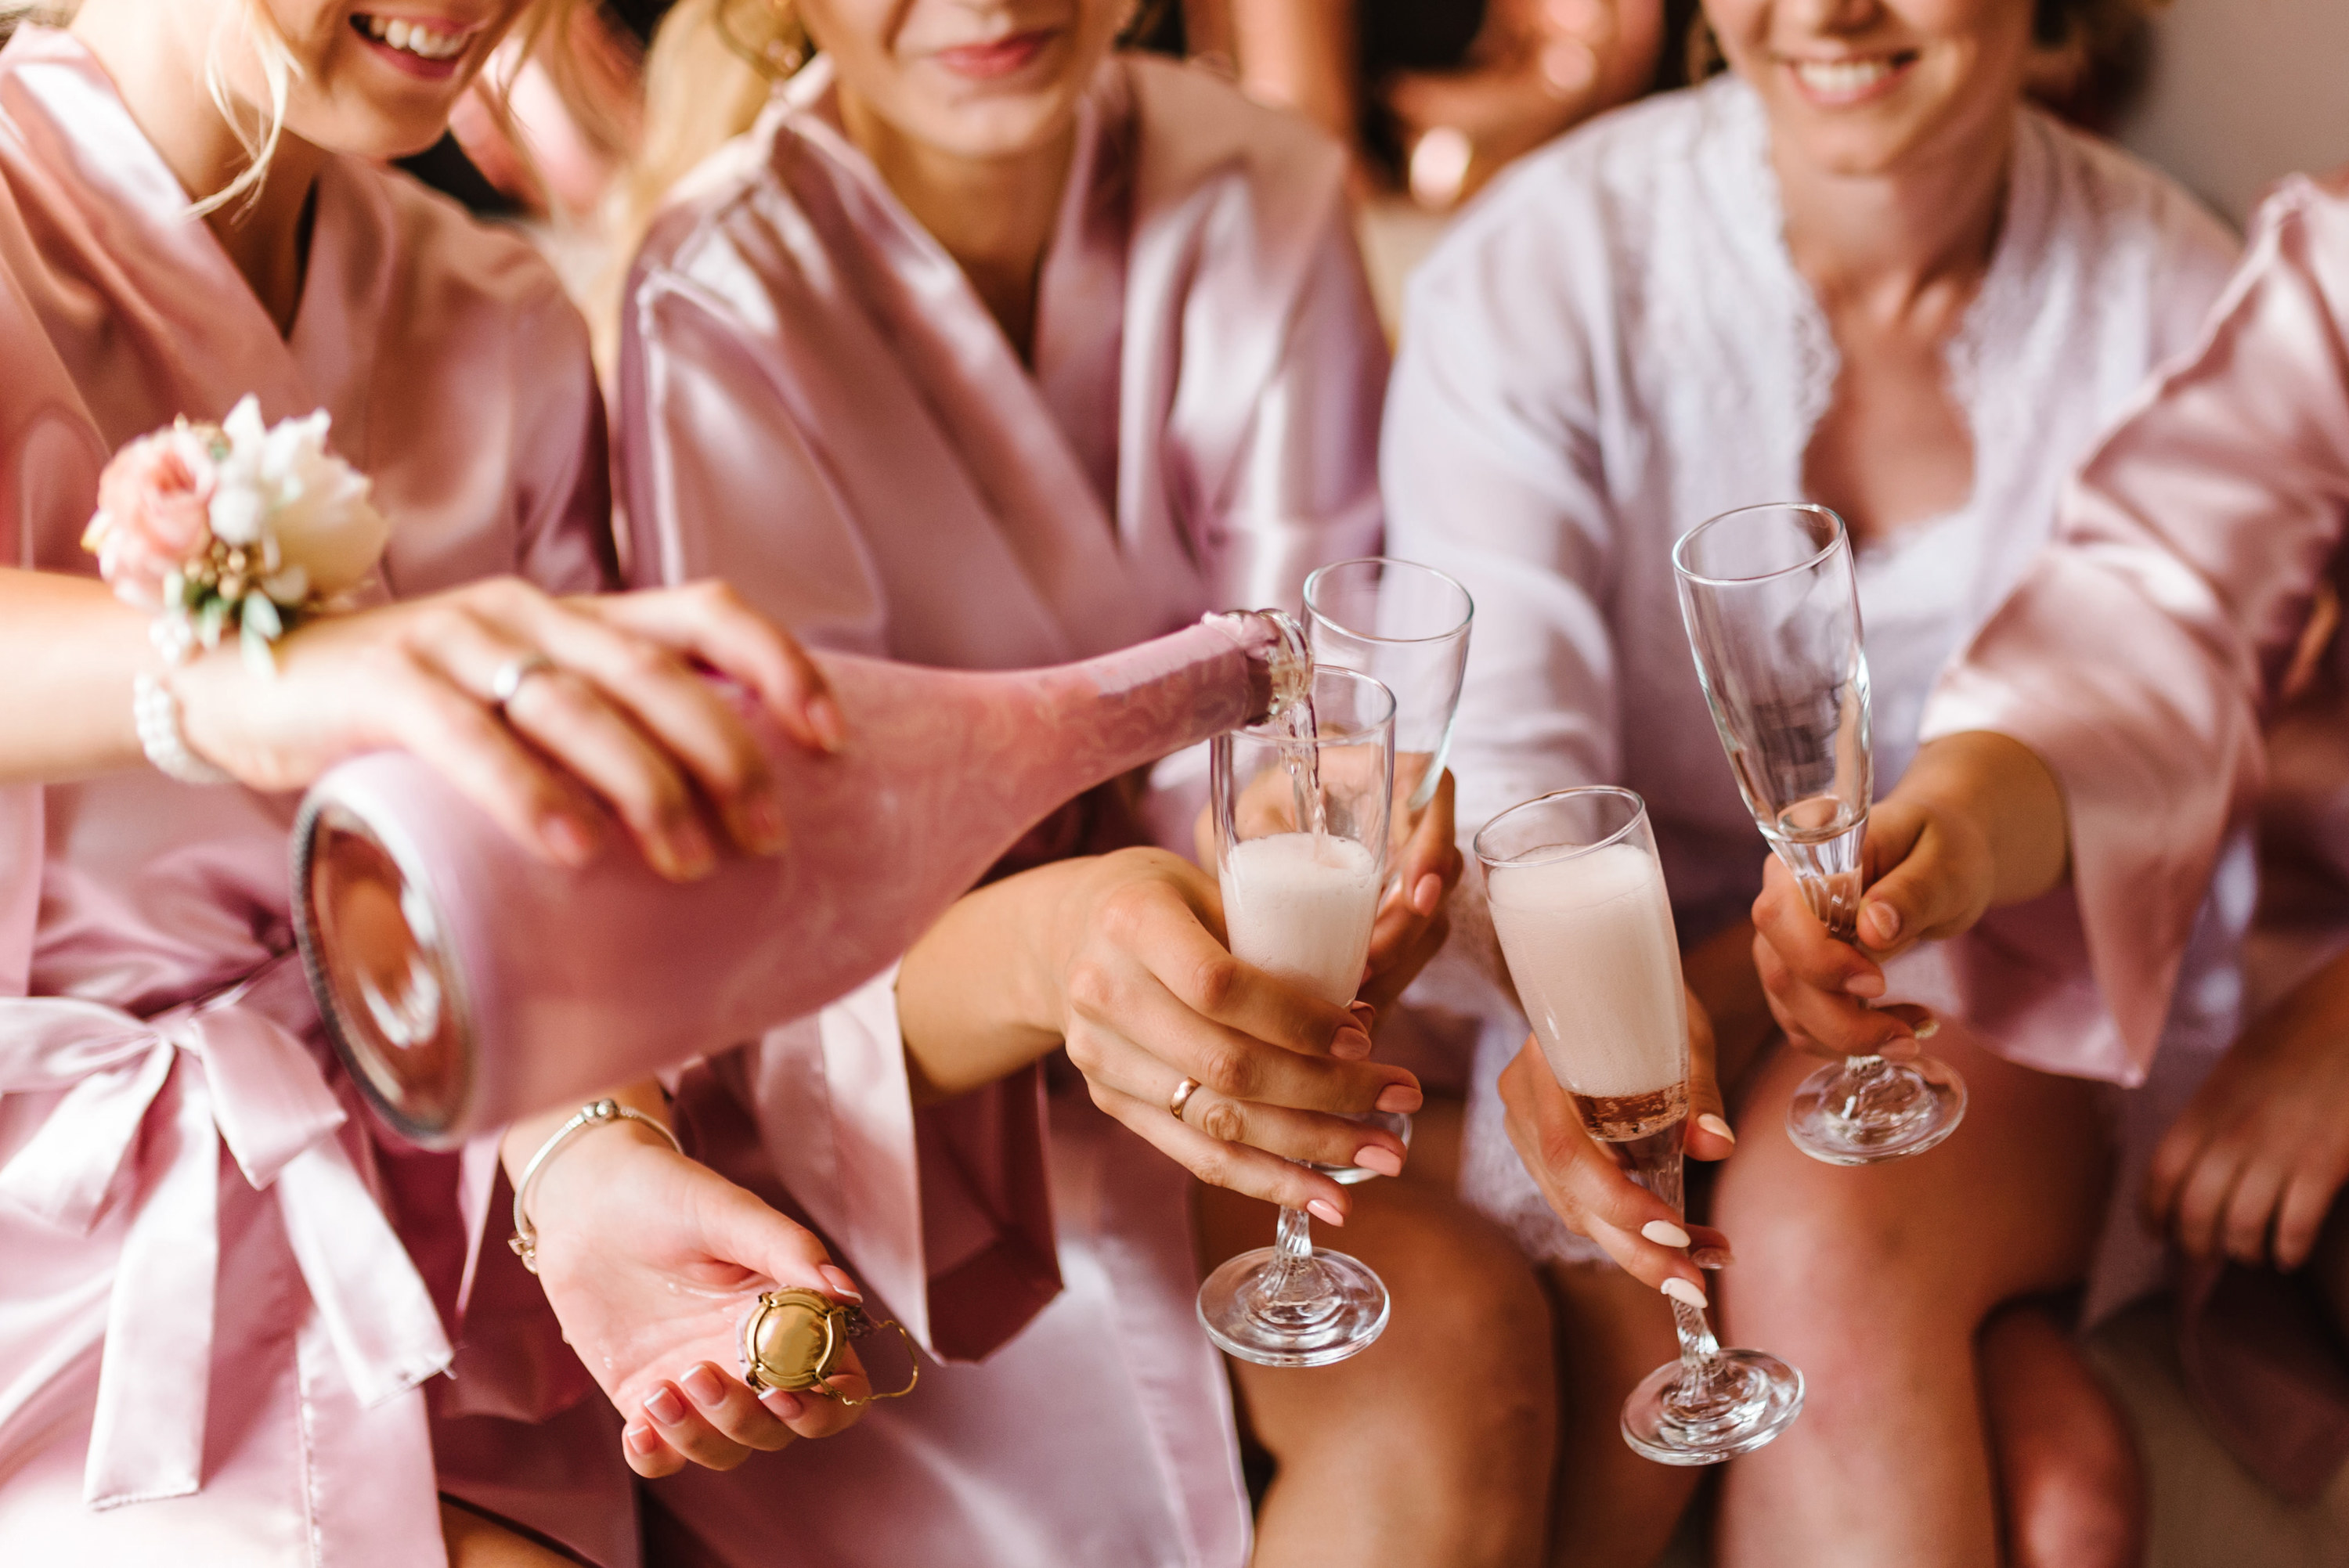 A bride and her bridesmaids celebrate with champagne